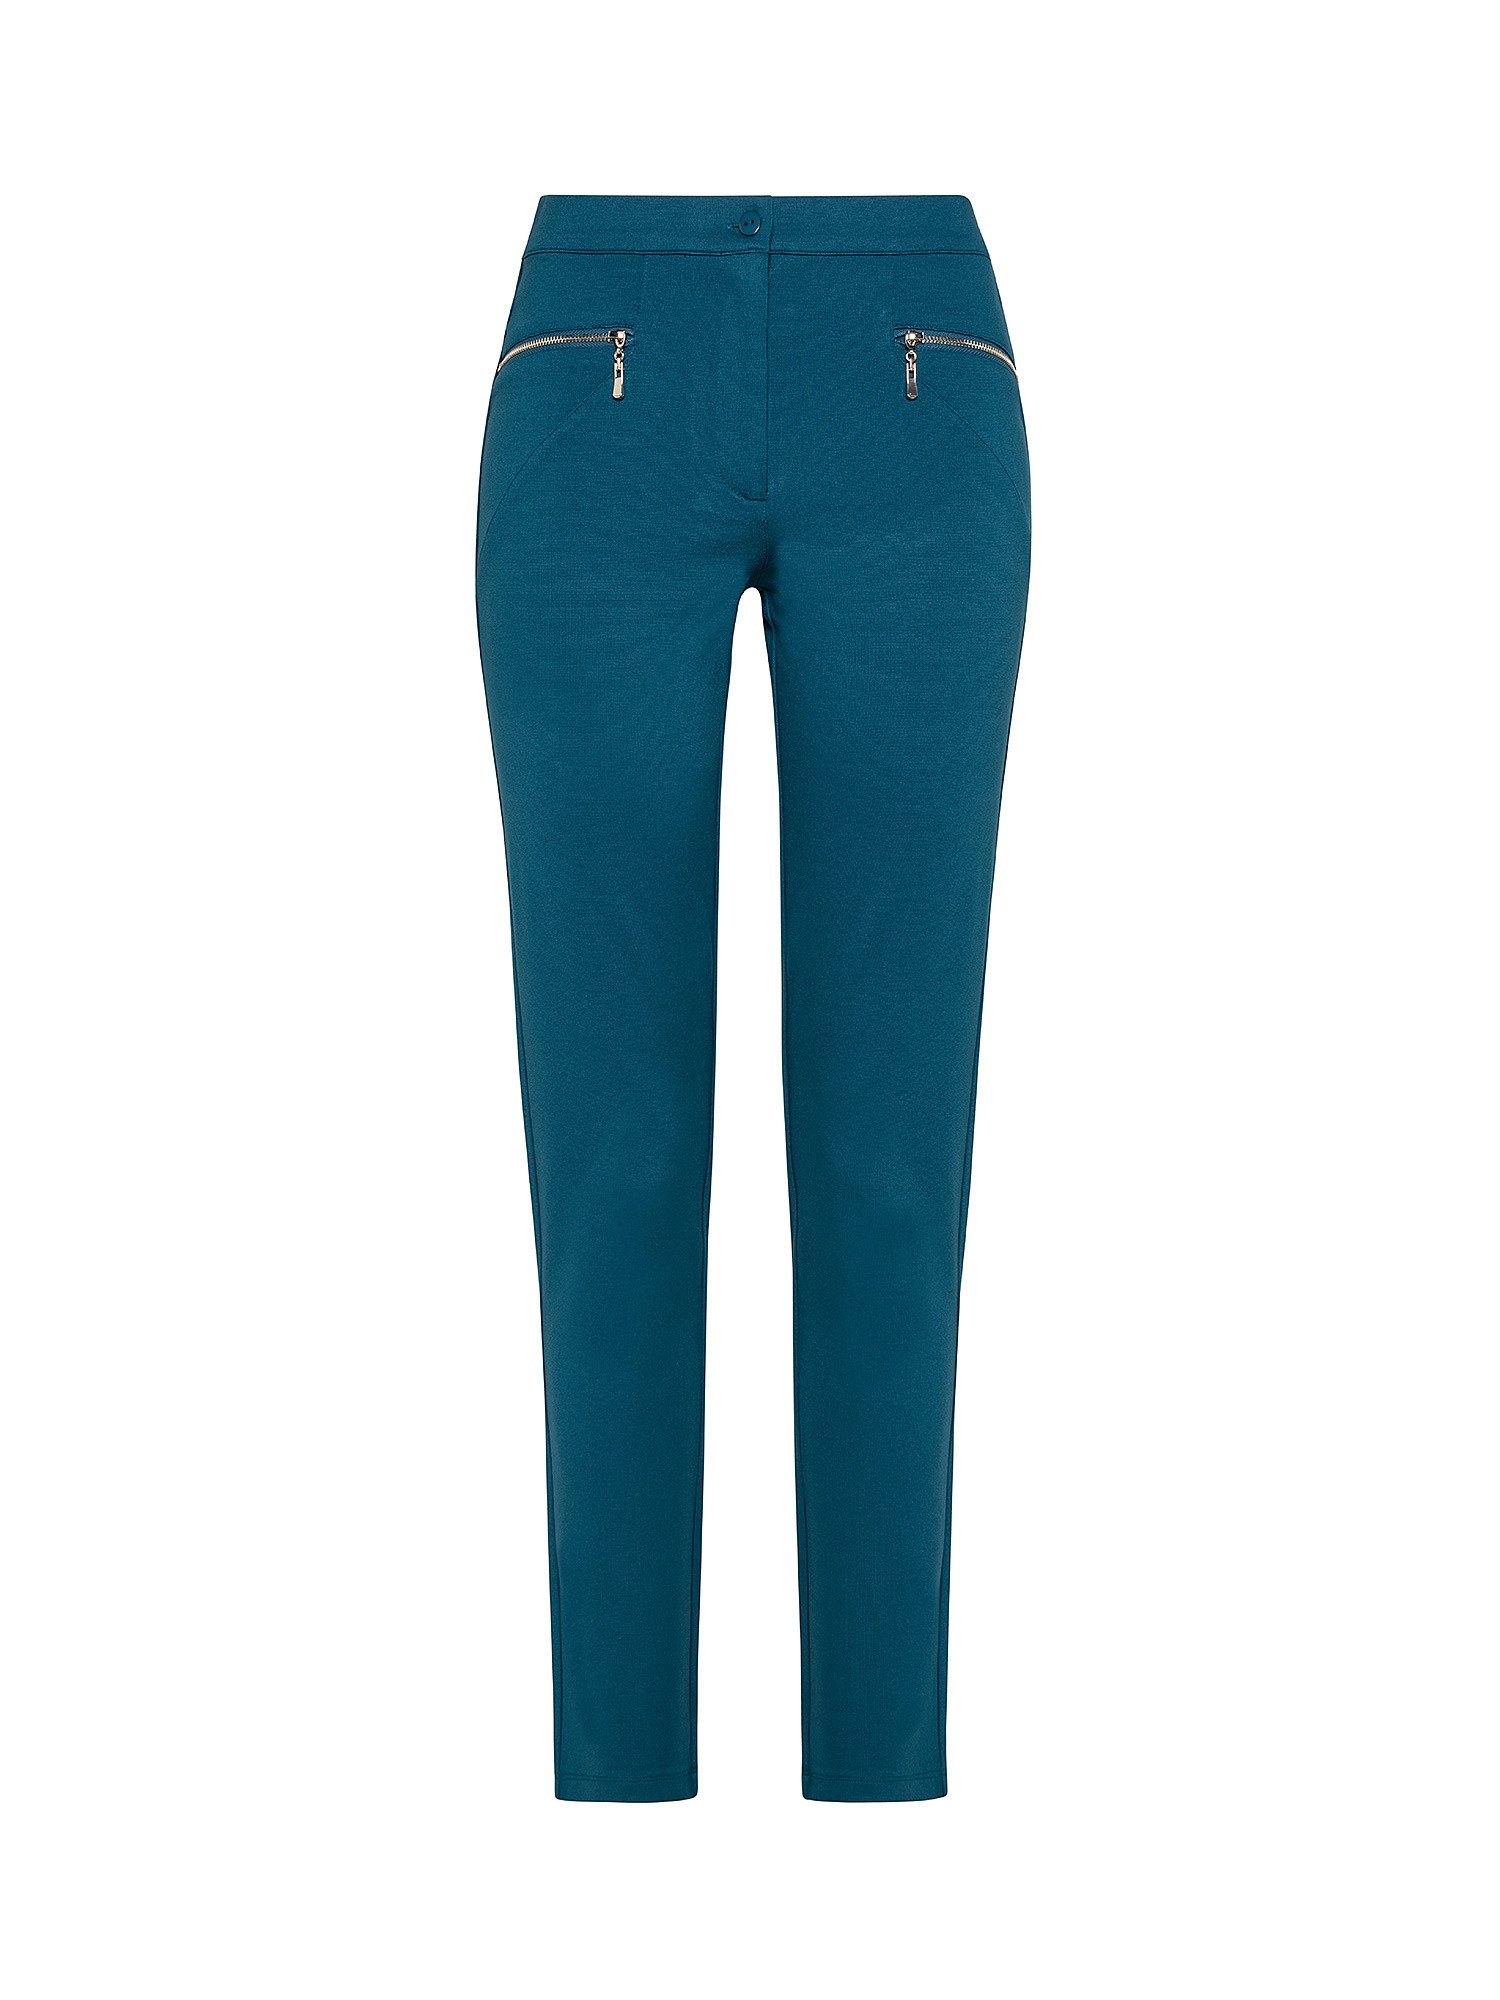 Trousers with pockets, Green teal, large image number 0